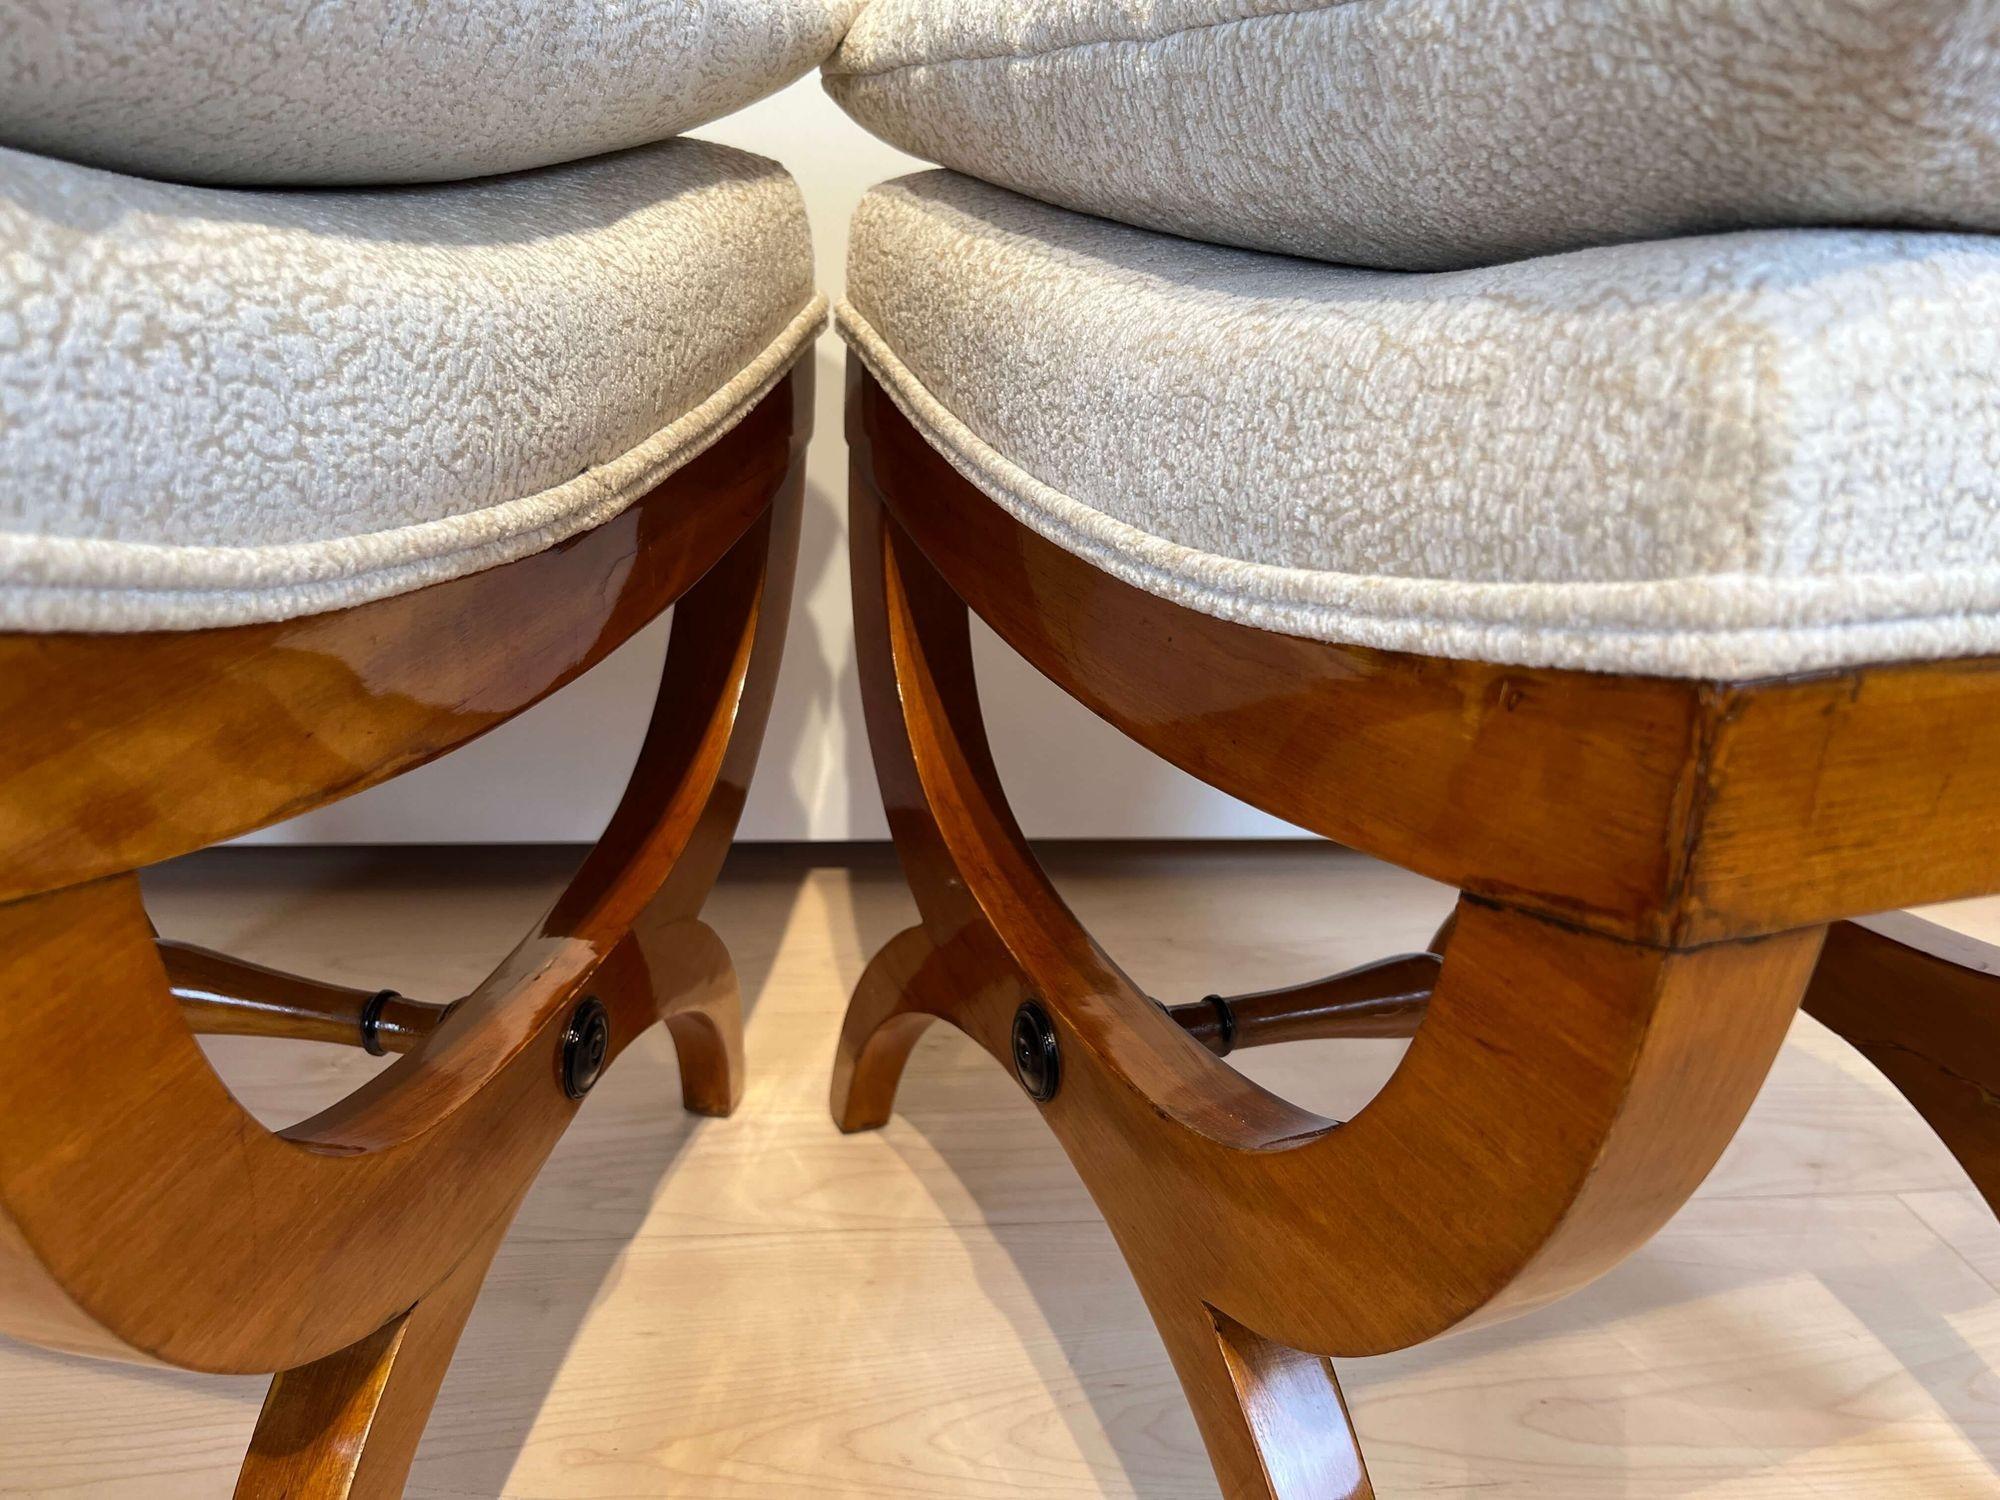 Pair of Large Tabourets, Beech Wood, France, circa 1860 For Sale 7